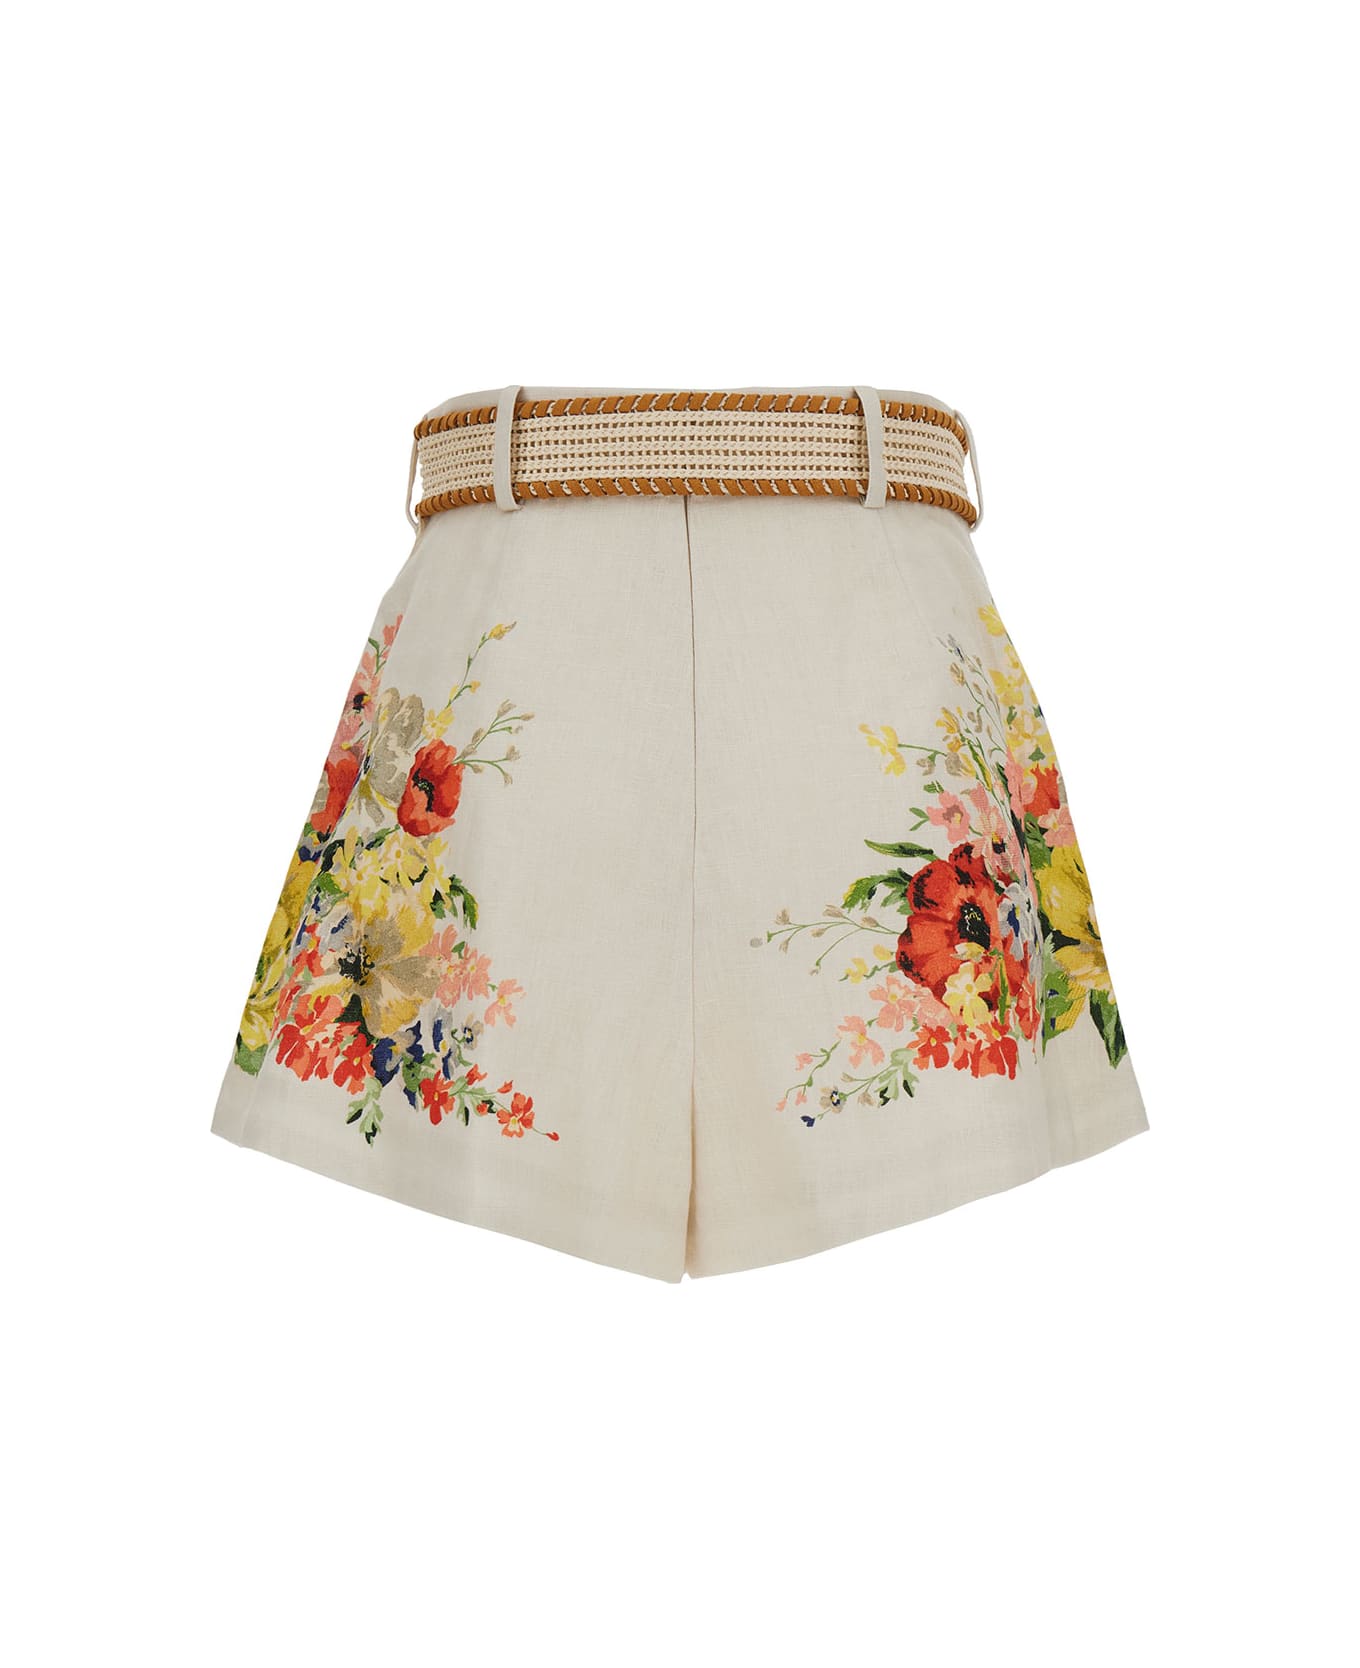 Zimmermann White Shorts With Floreal Print And Belt In Linen Woman - Multicolor